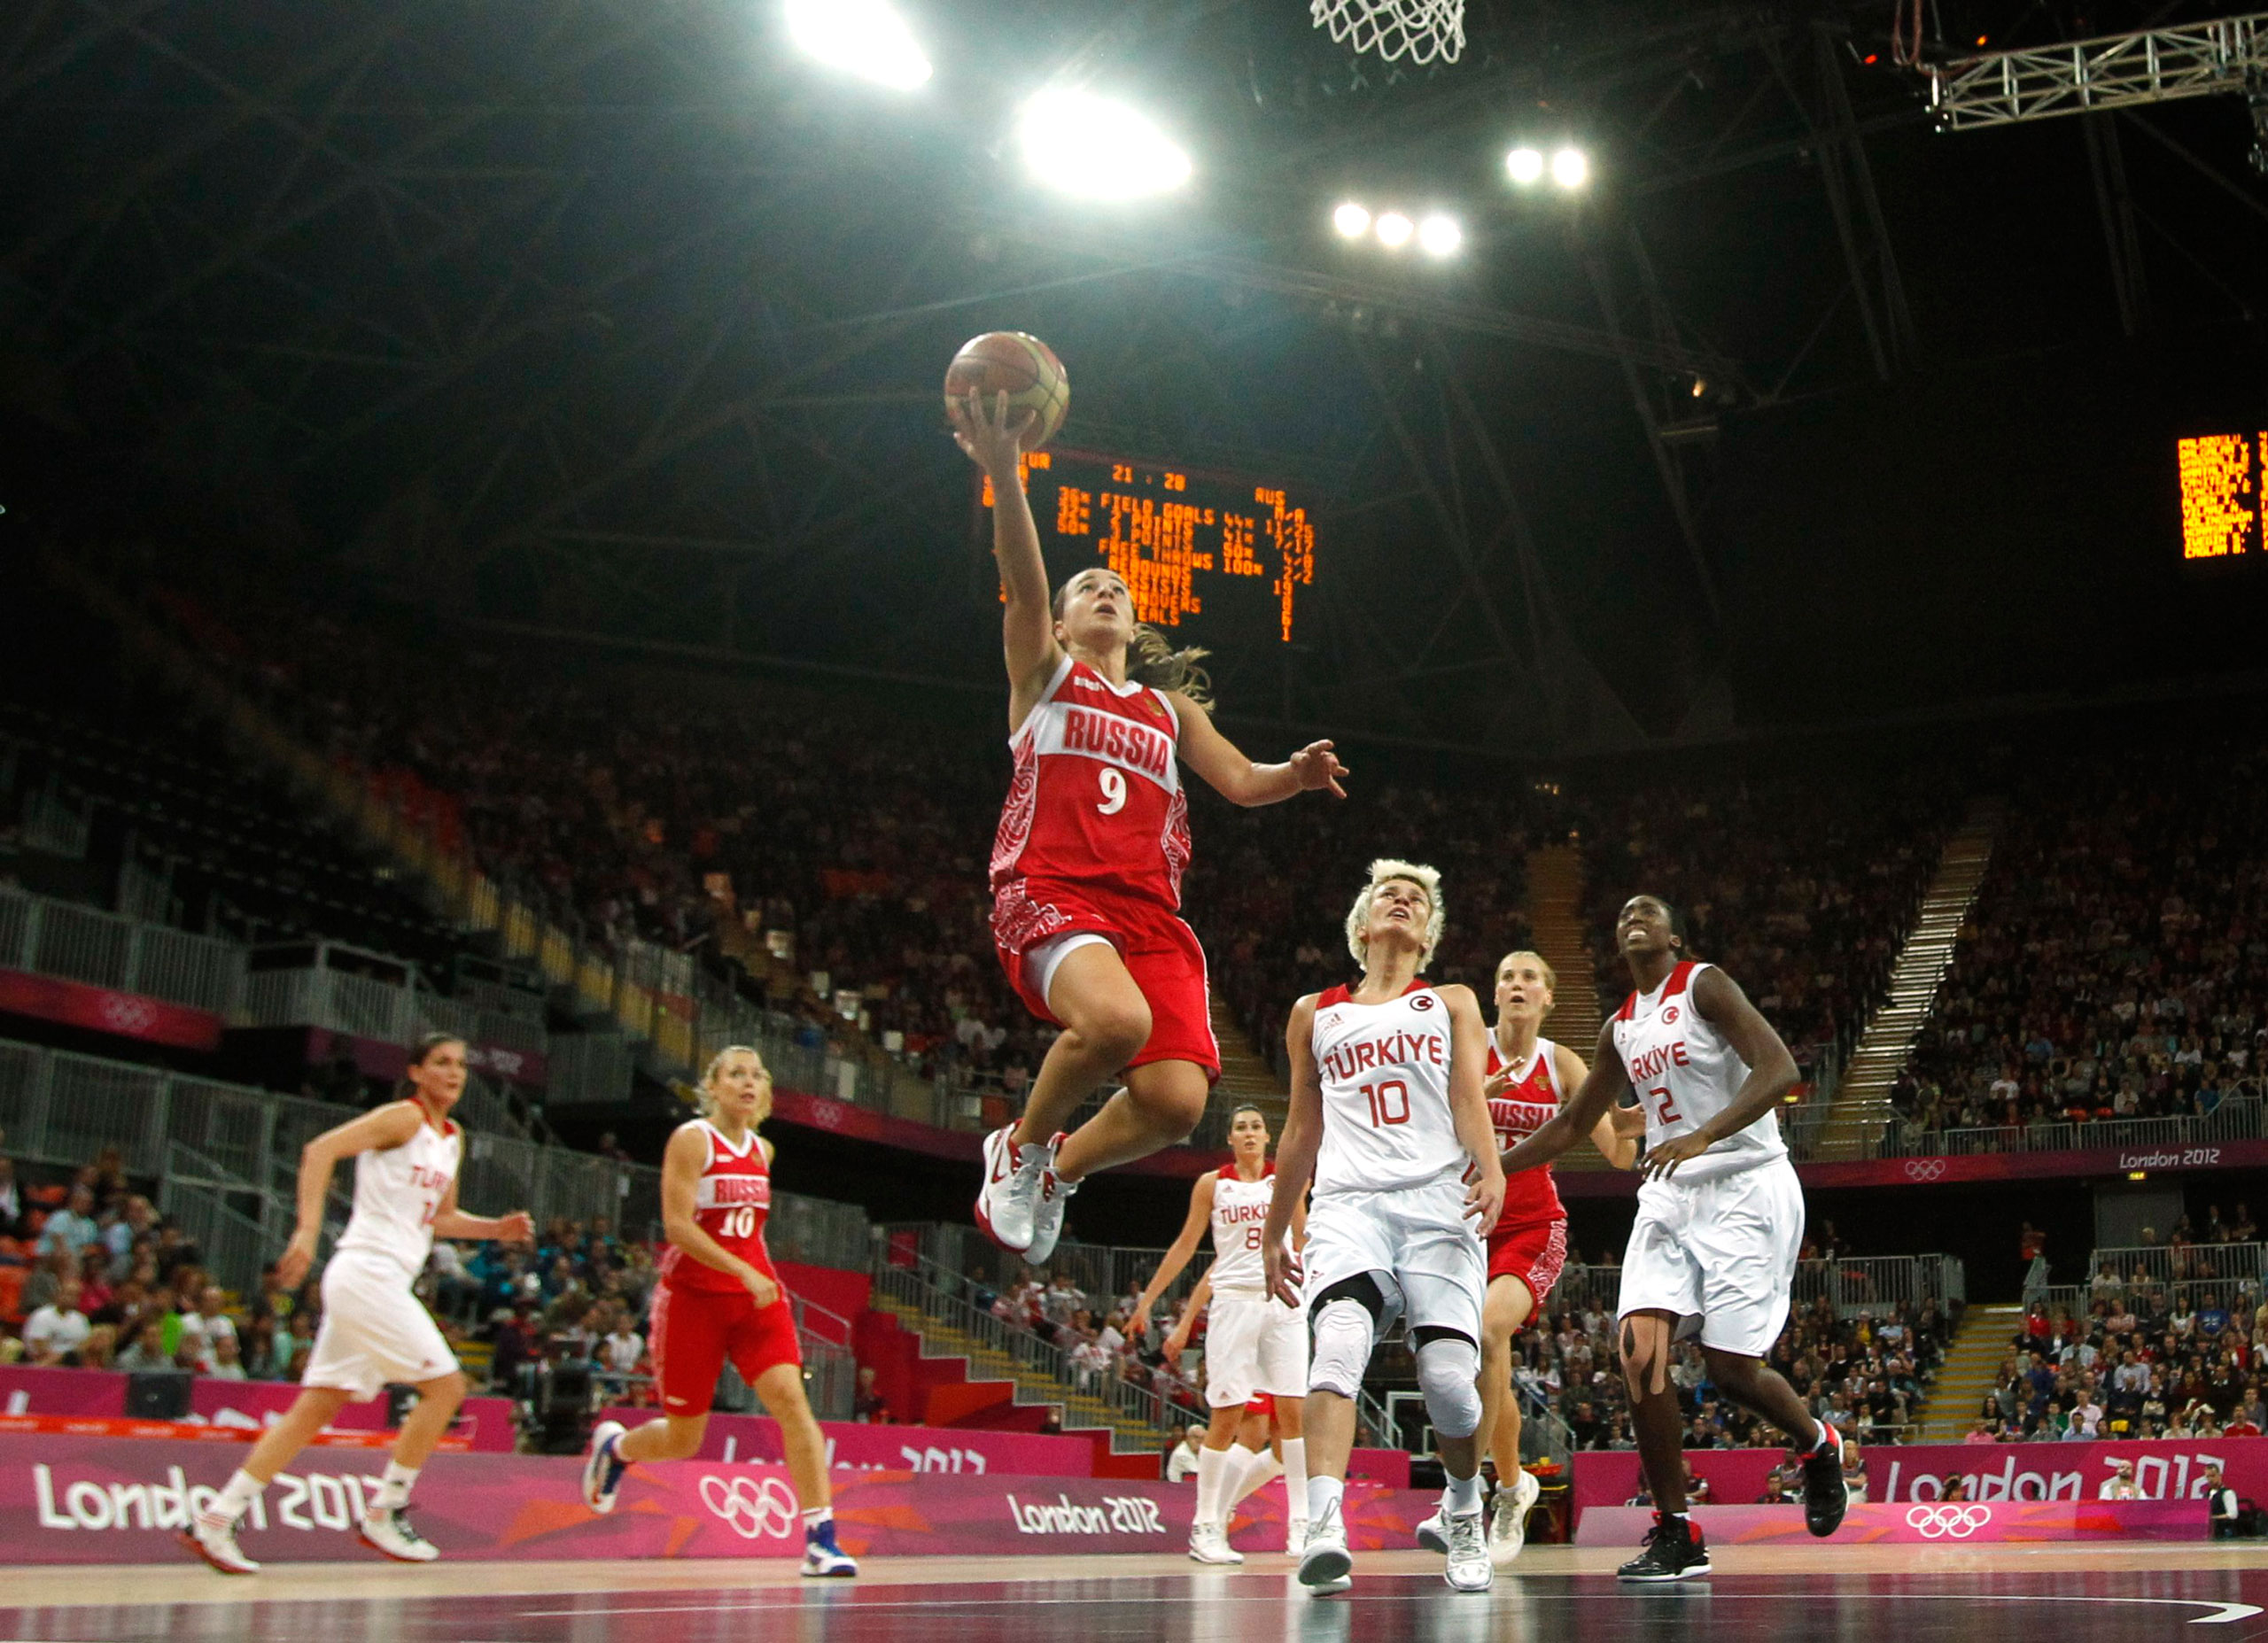 Hammon scoring for the Russian national team during the 2012 Olympic Games in London. (Mike Segar—Reuters)